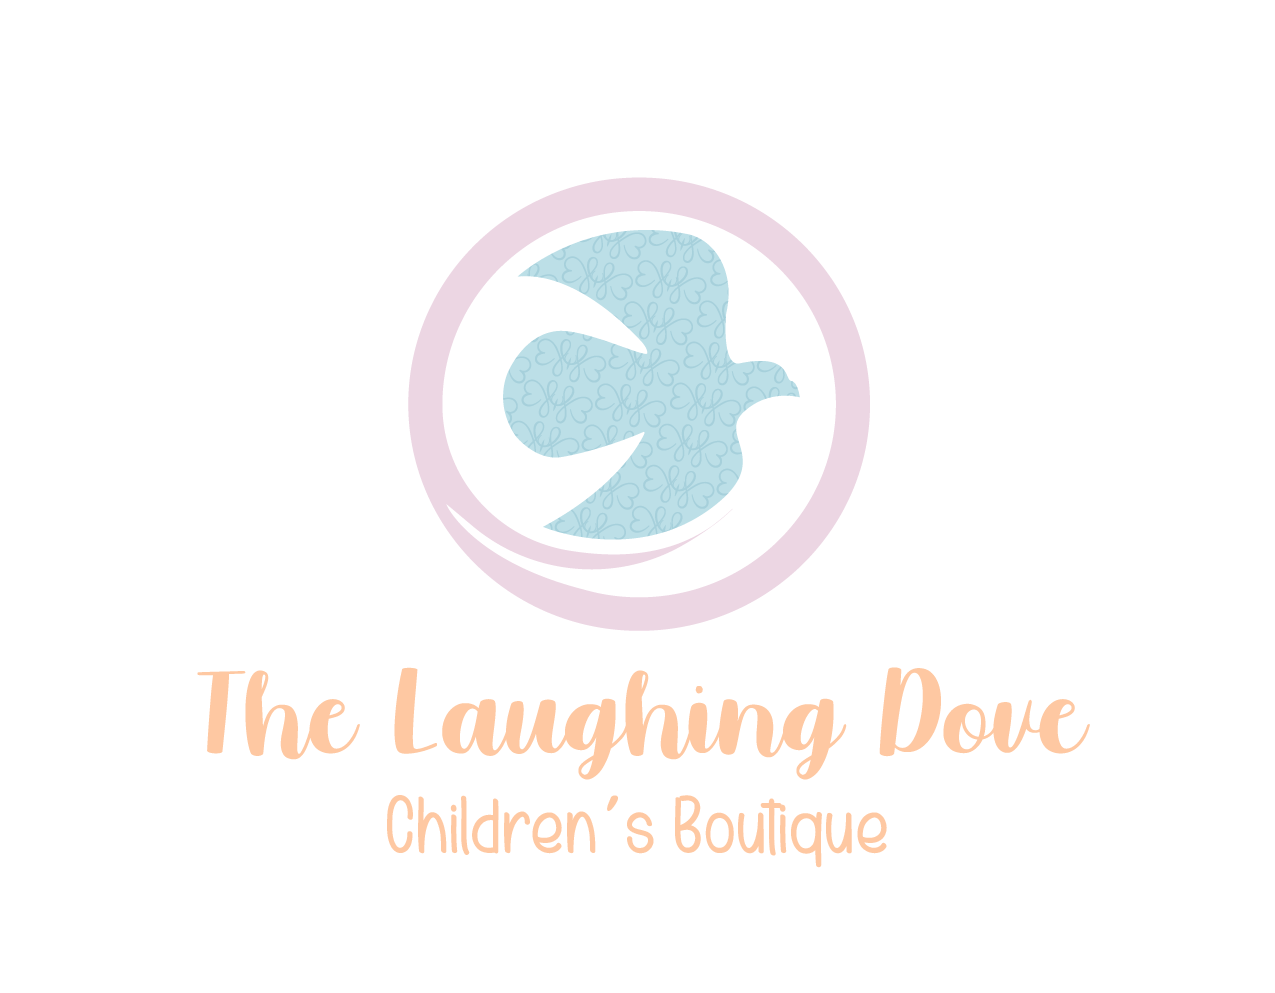 The Laughing Dove Children's Boutique